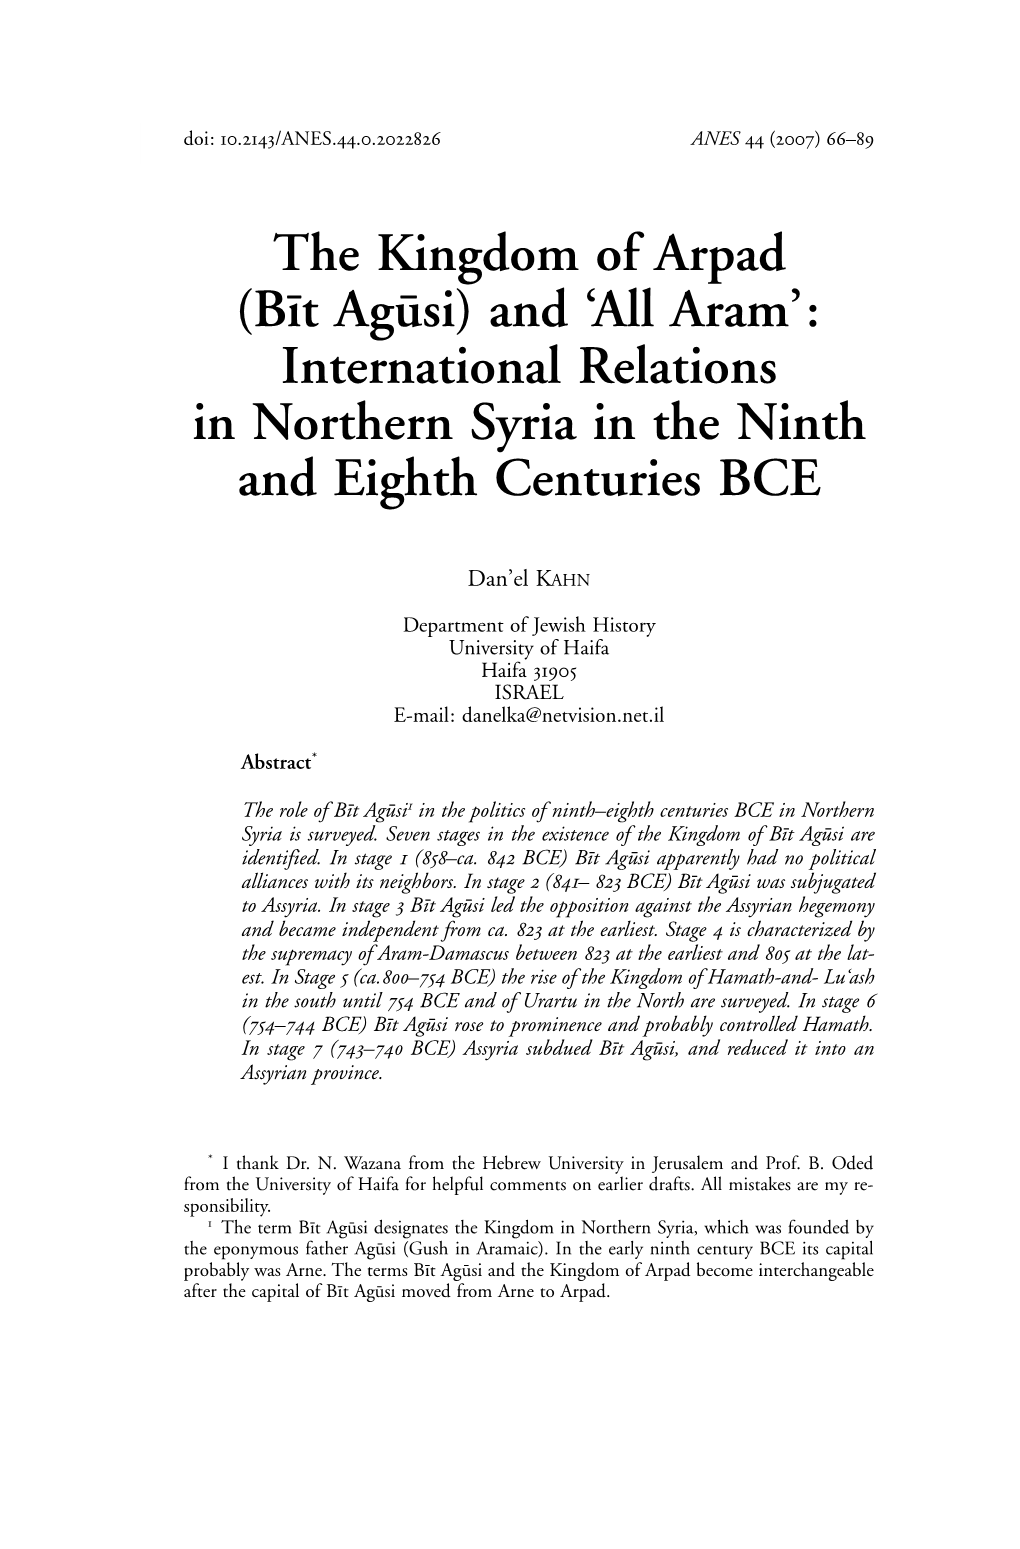 The Kingdom of Arpad (Bit Agusi) and 'All Aram': International Relations in Northern Syria in the Ninth and Eighth Centuries B